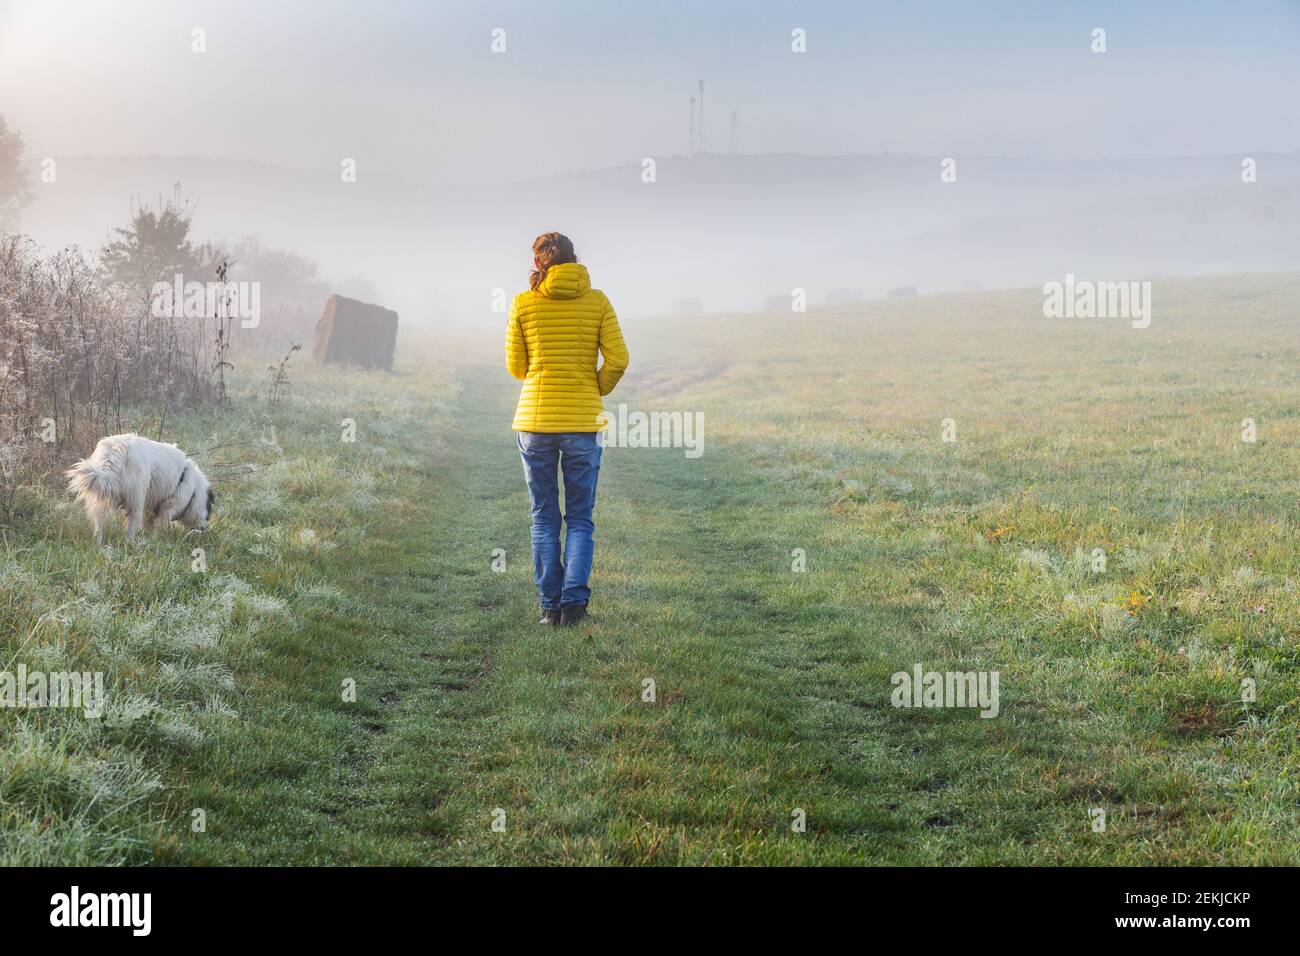 woman with dog walking in early morning foggy landscape Stock Photo